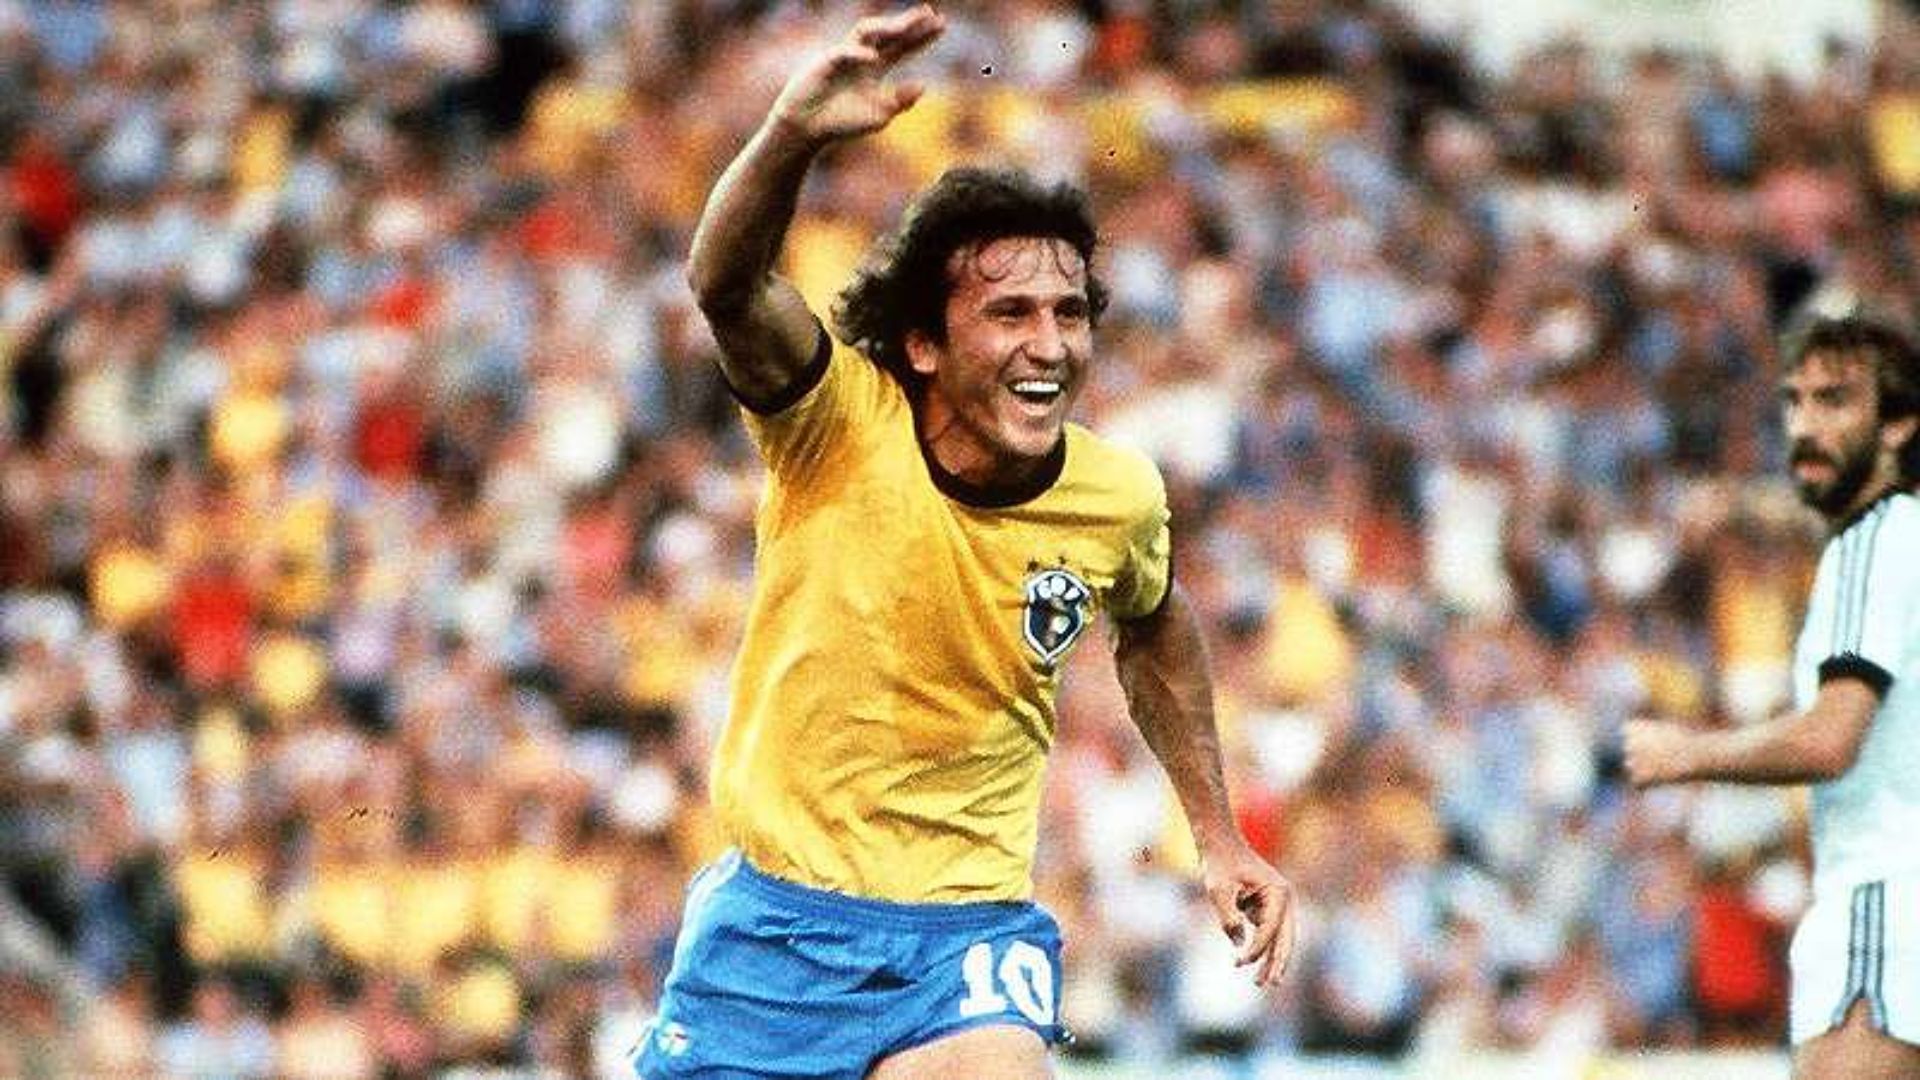 Zico was one of the greatest playmakers the world has ever seen.